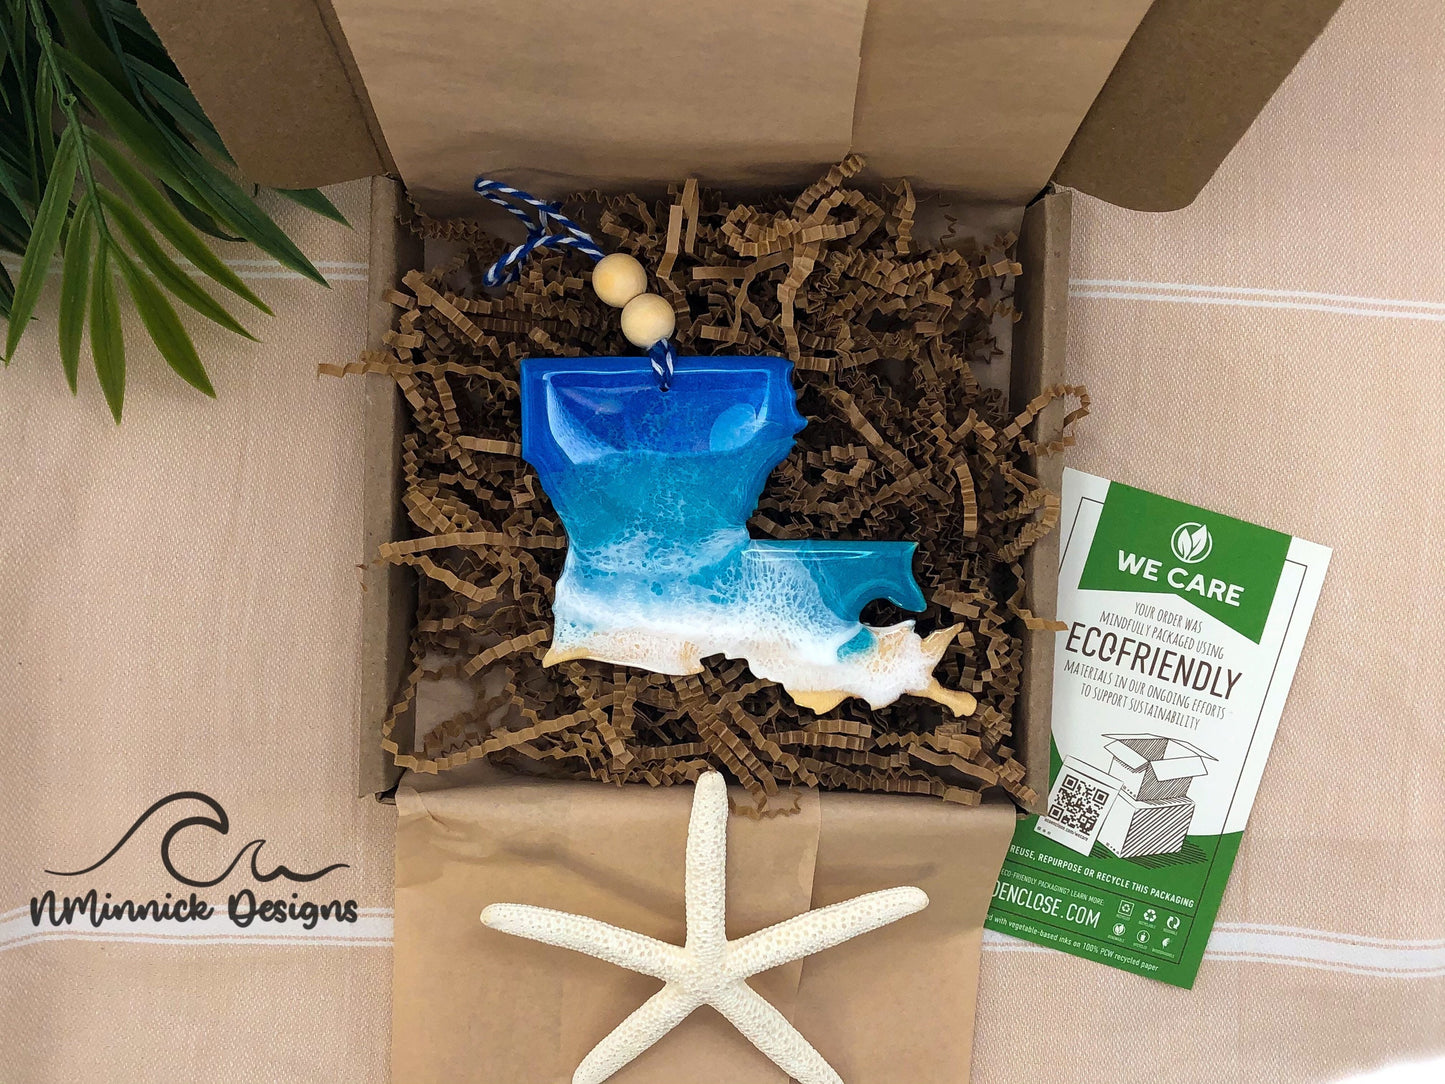 Louisiana ocean resin ornament packaged in ecofriendly plastic free materials with recyclable box, tissue paper and paper shred.